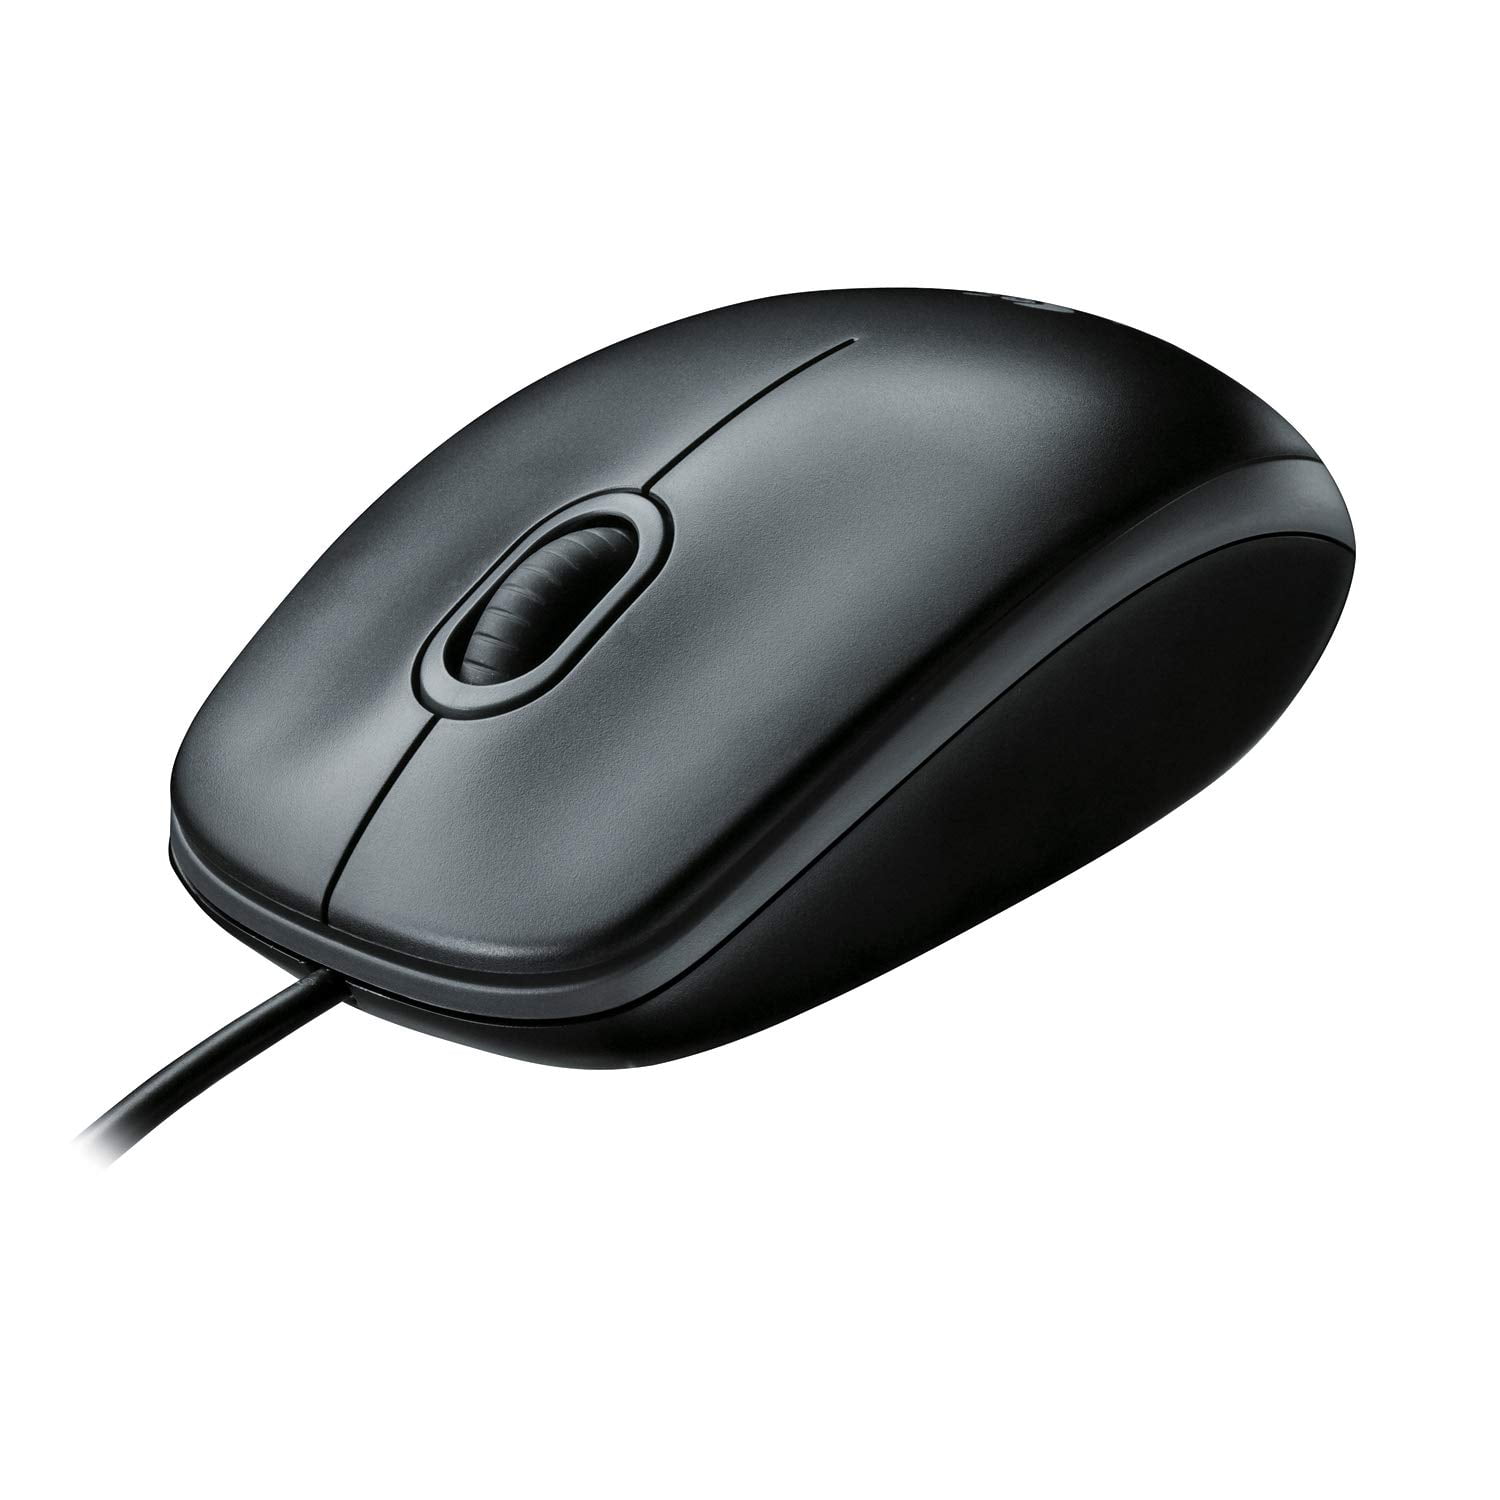 Laptop mouse price